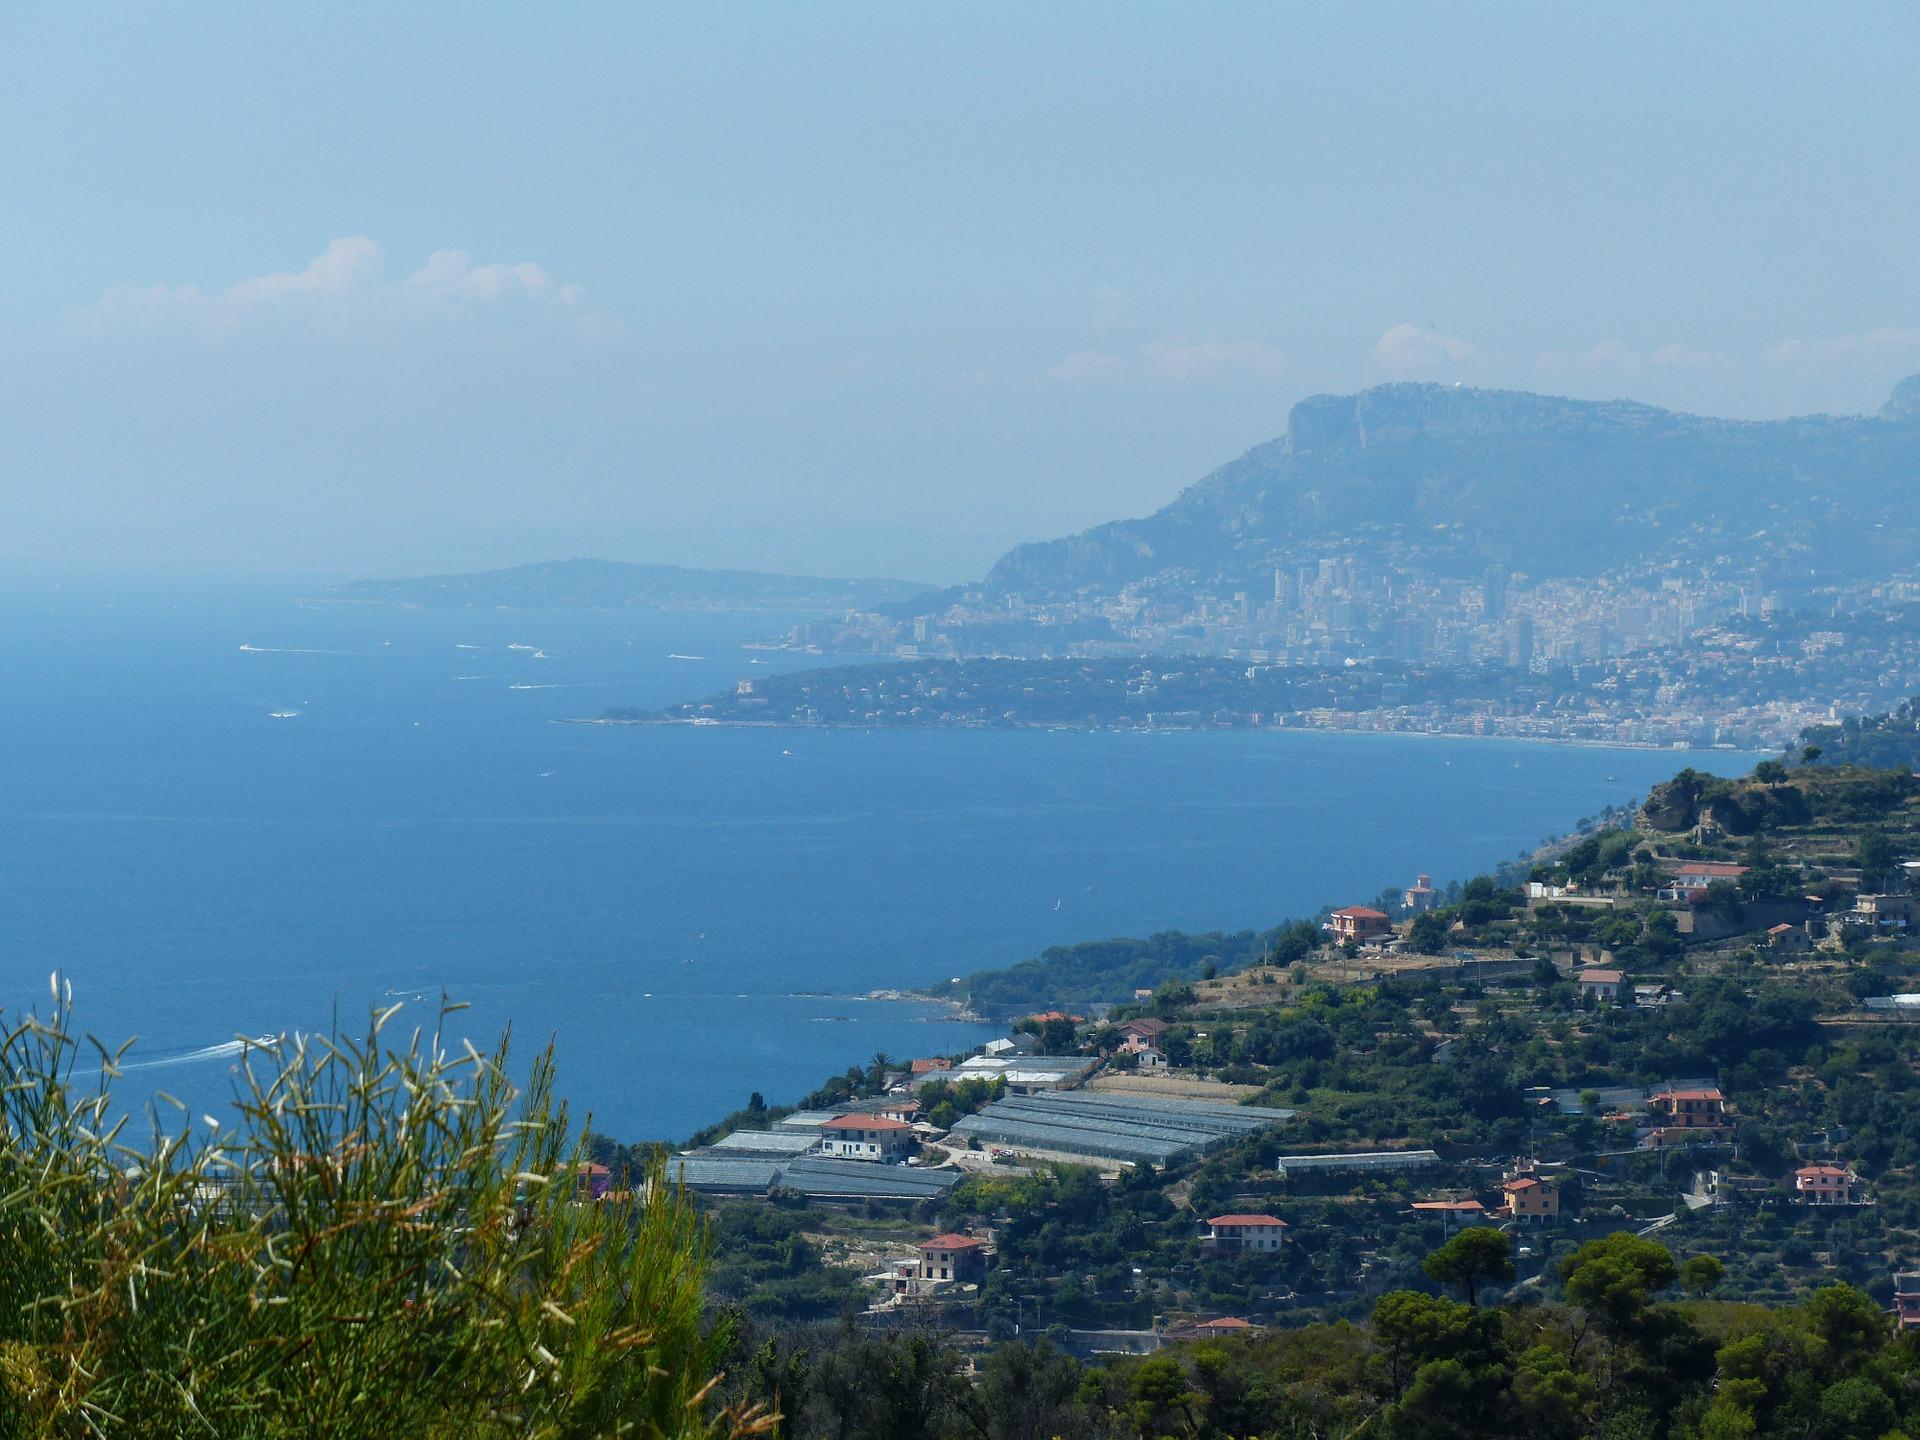 Aerial view of countryside near Roquebrune-Cap-Martin with cloudy sky